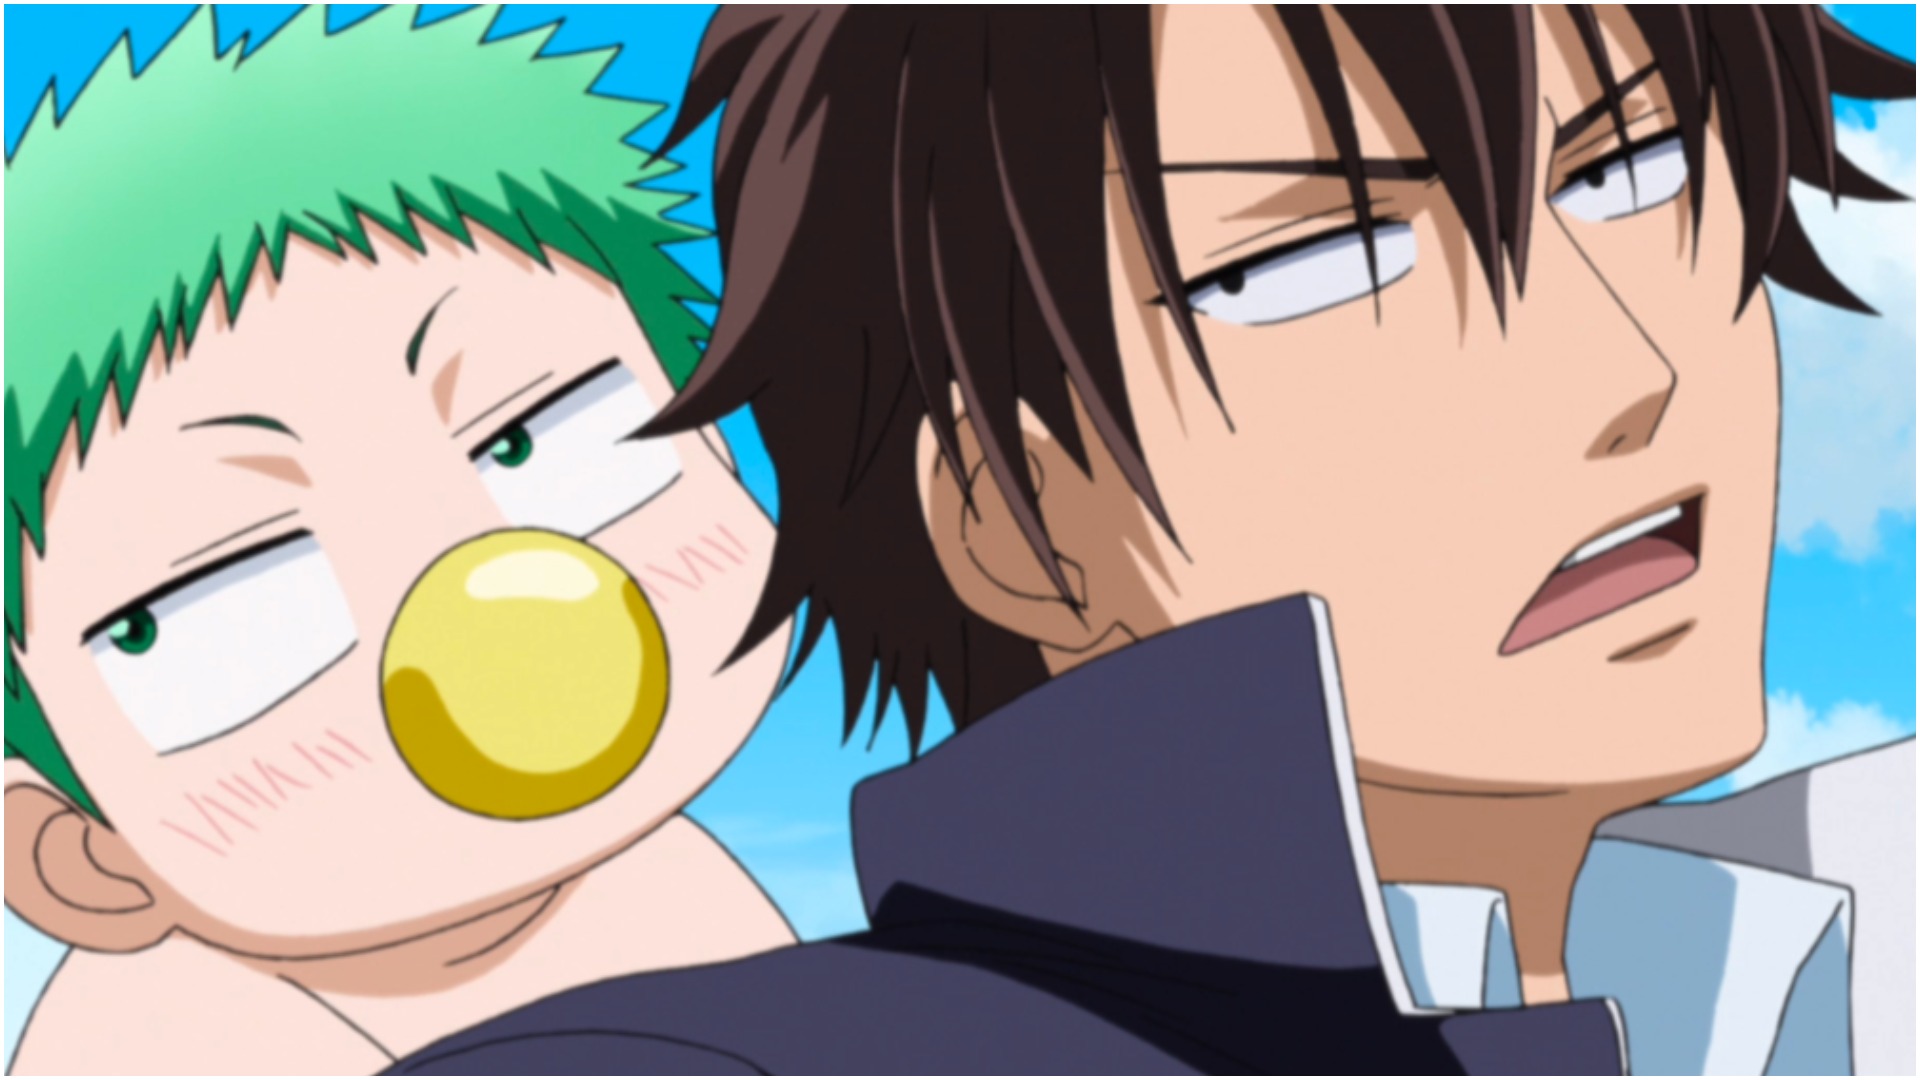 Crunchyroll - FEATURE: Our Top 5 Favorite Anime Delinquents